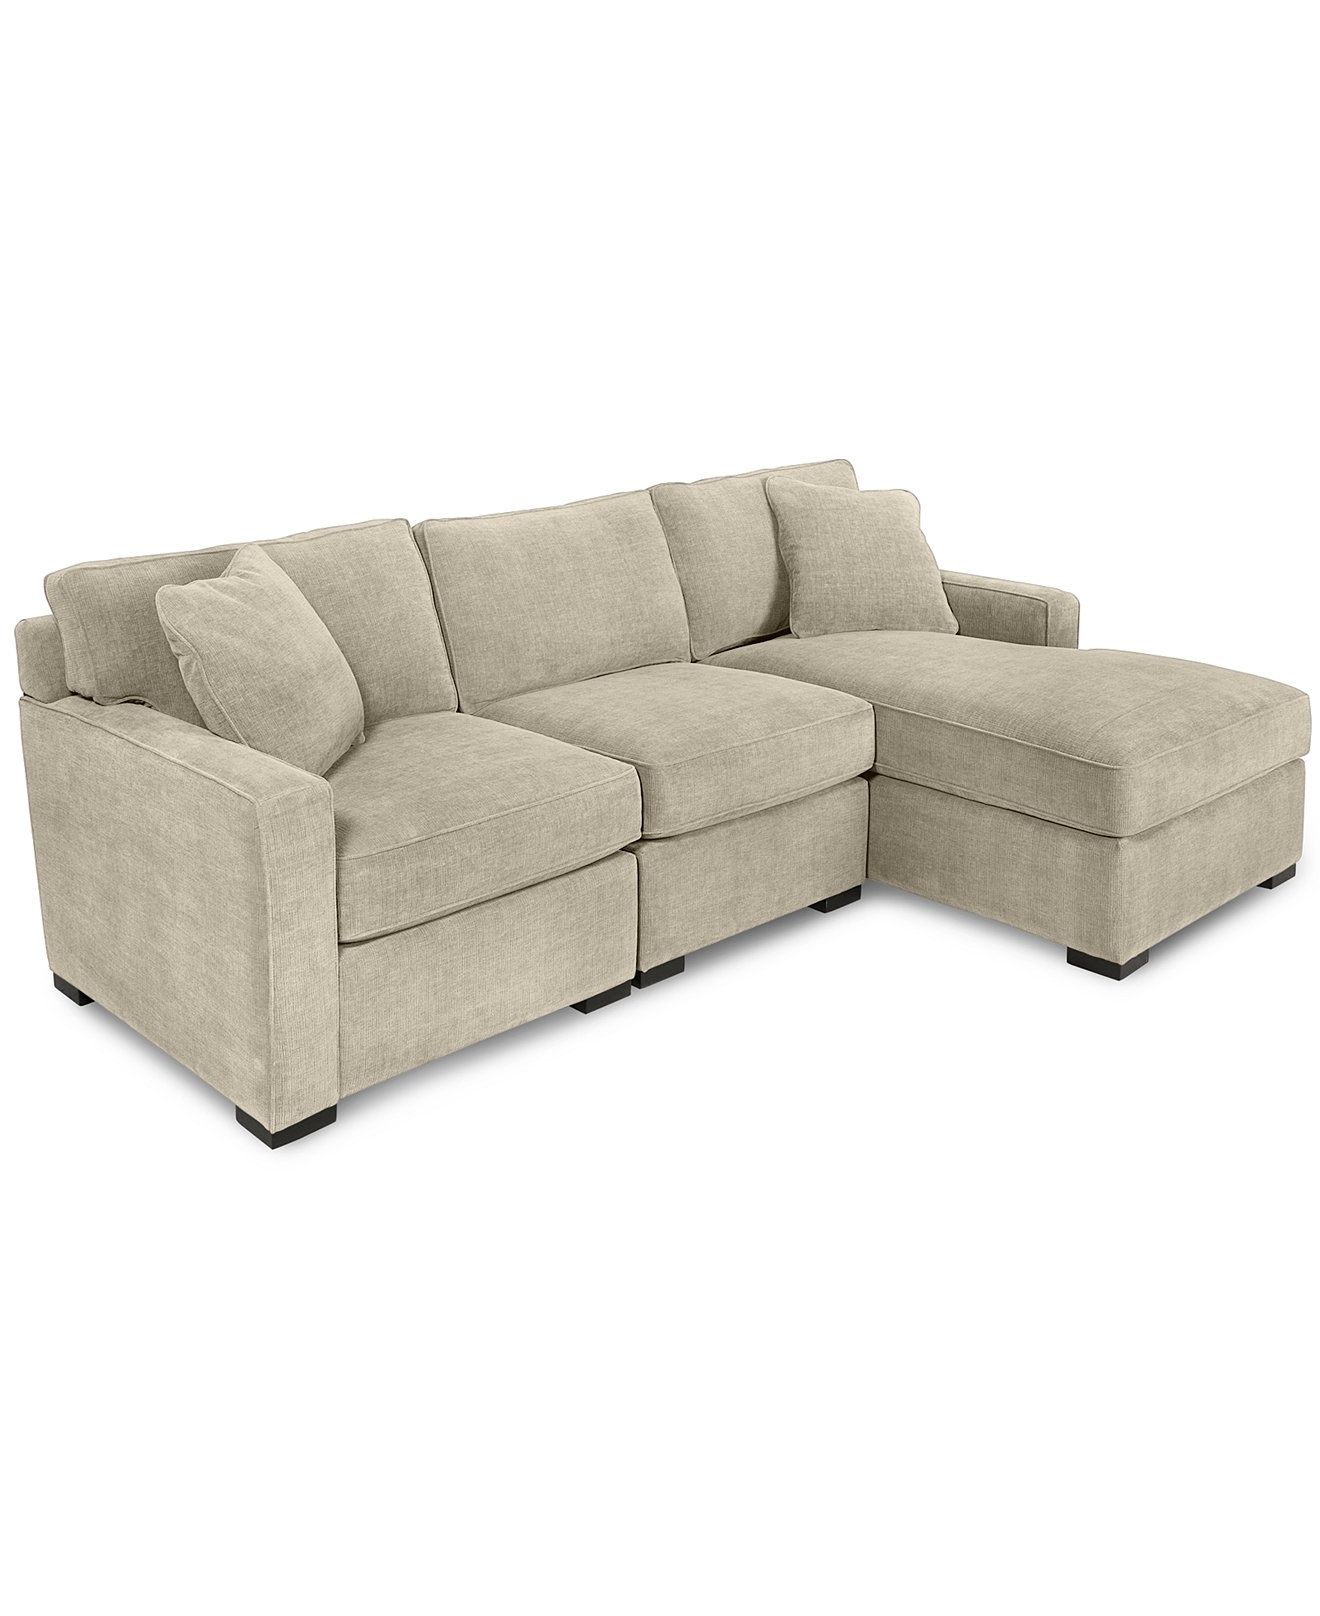 Radley 3 Piece Fabric Chaise Sectional Sofa, Created For Macy's Intended For Kelowna Sectional Sofas (View 7 of 10)